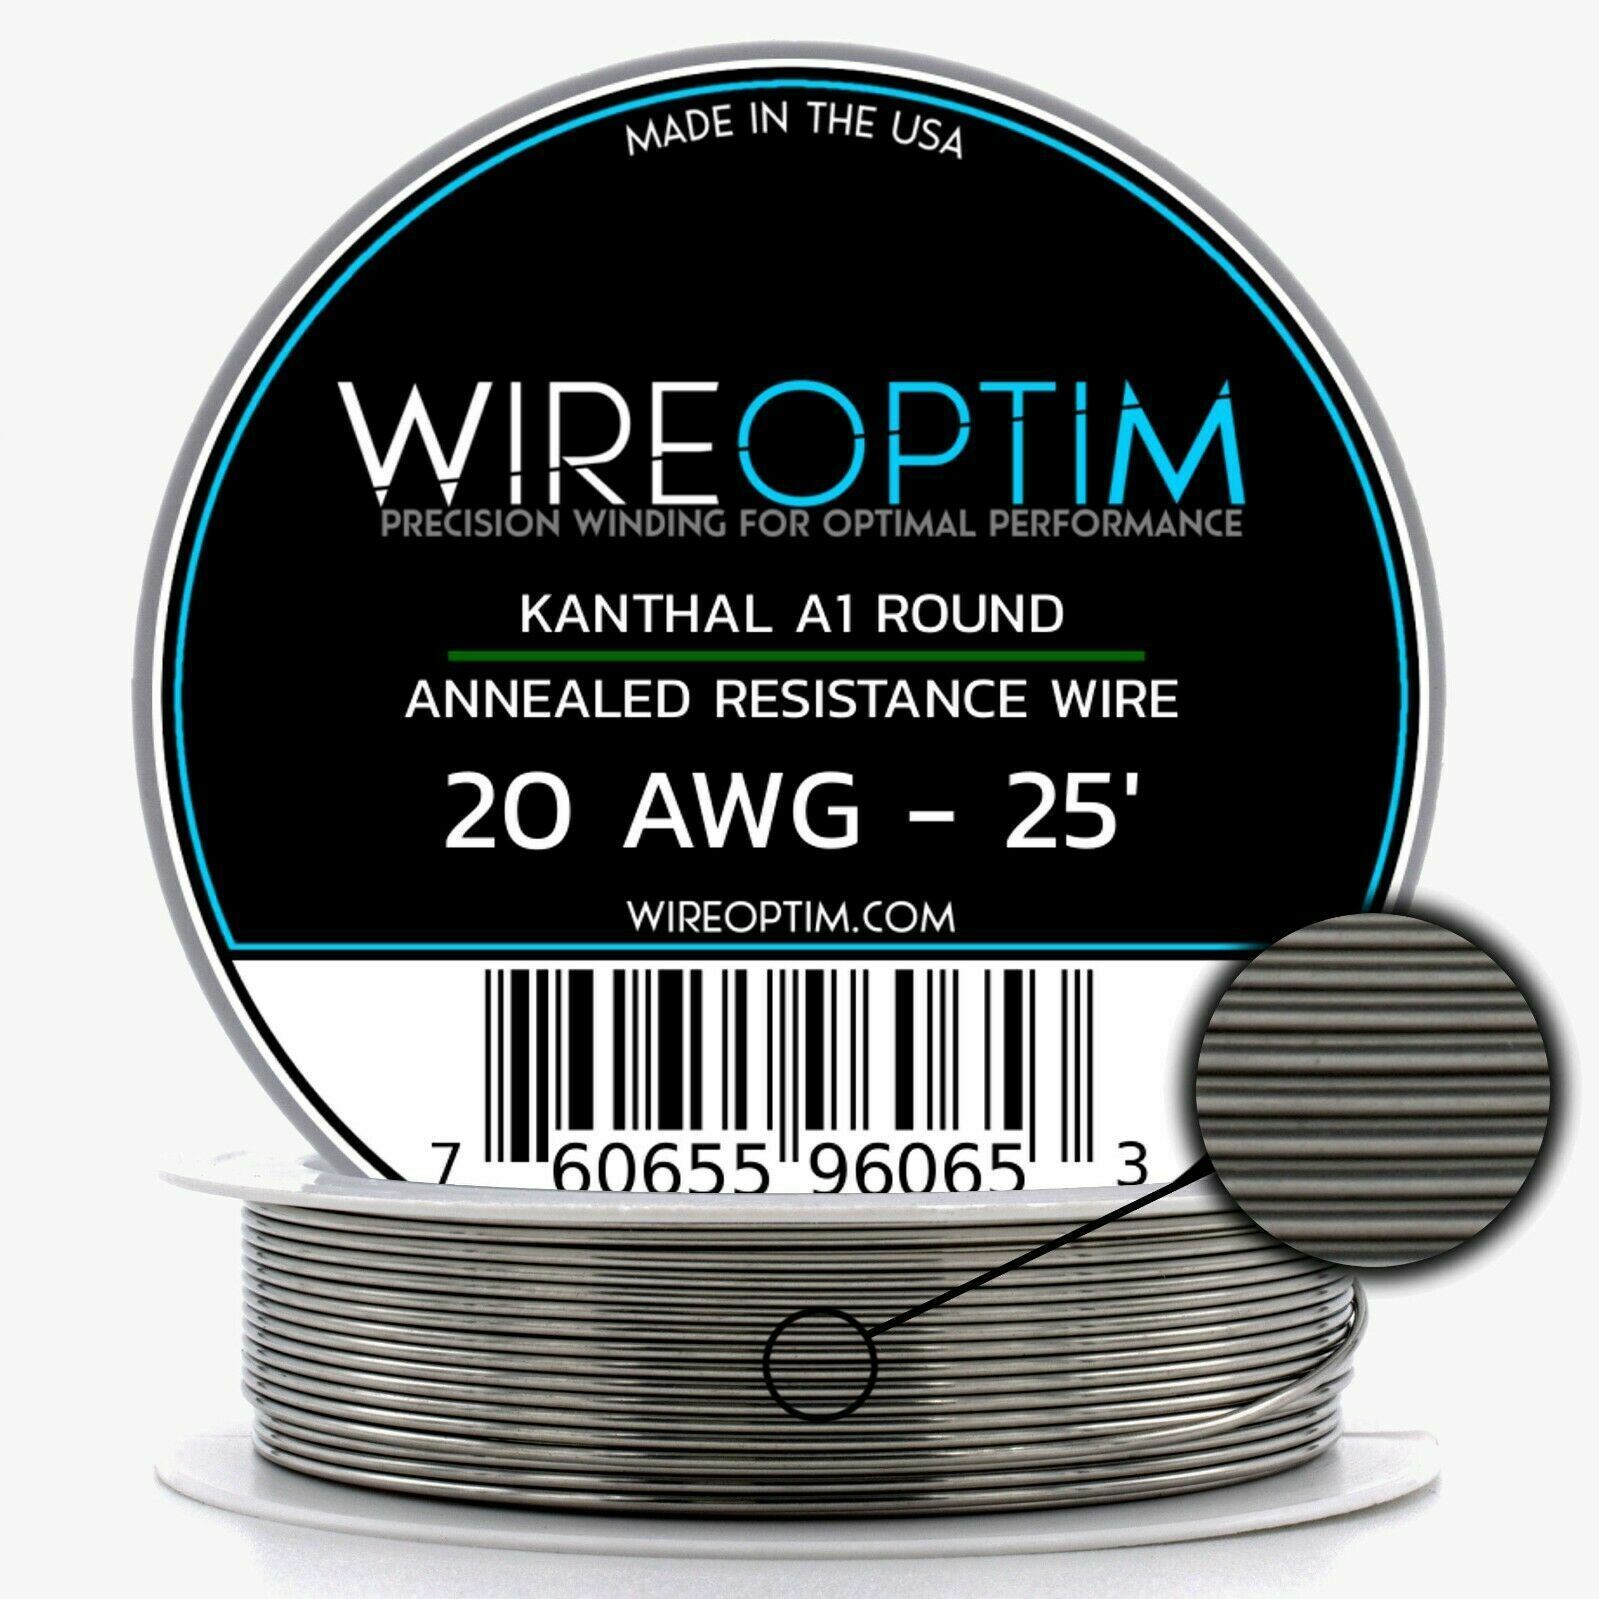 Kanthal A1 16 18 20 21 22 23 24 25 26 27 28 29 30 31 32 34 36 38 40 AWG 25-1000\'